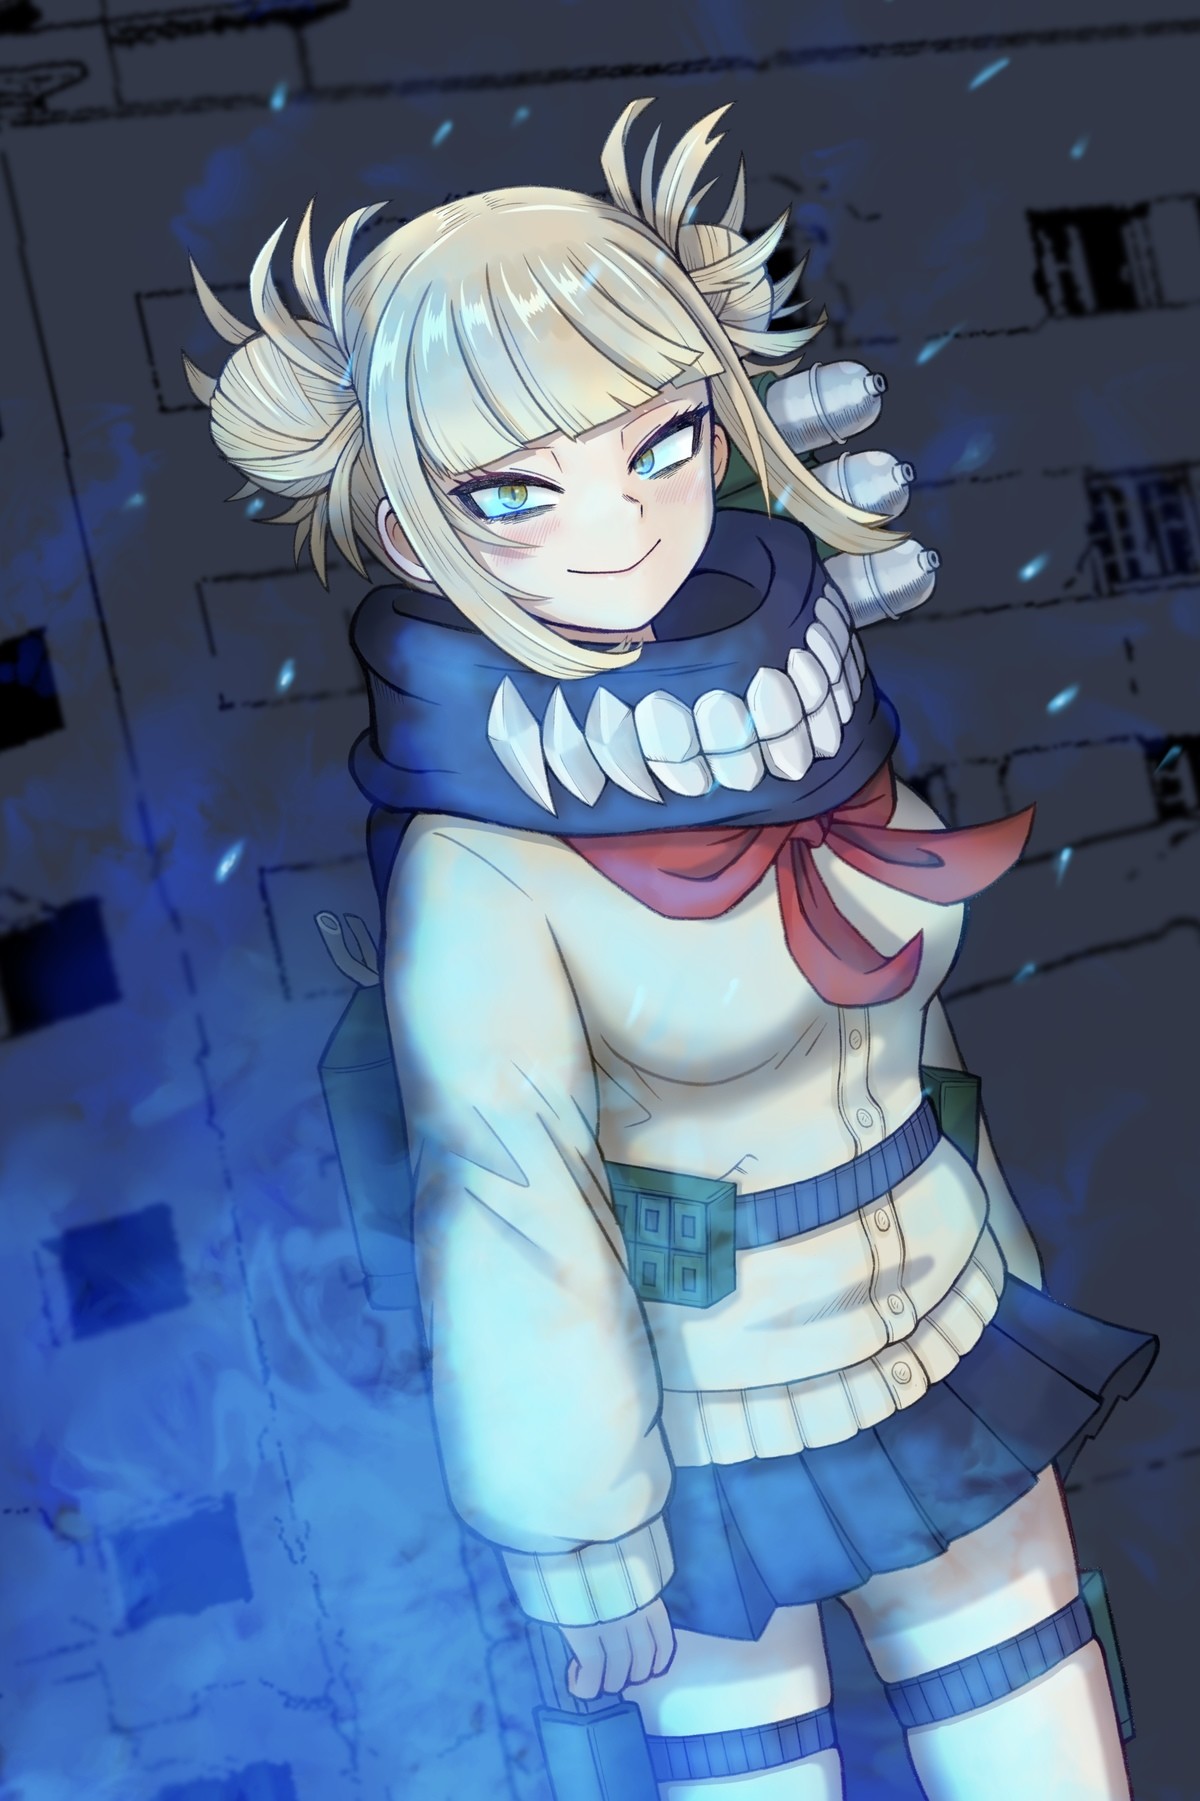 Daily Toga - 961: On fire yo. join list: DailyToga (477 subs)Mention History Source: .